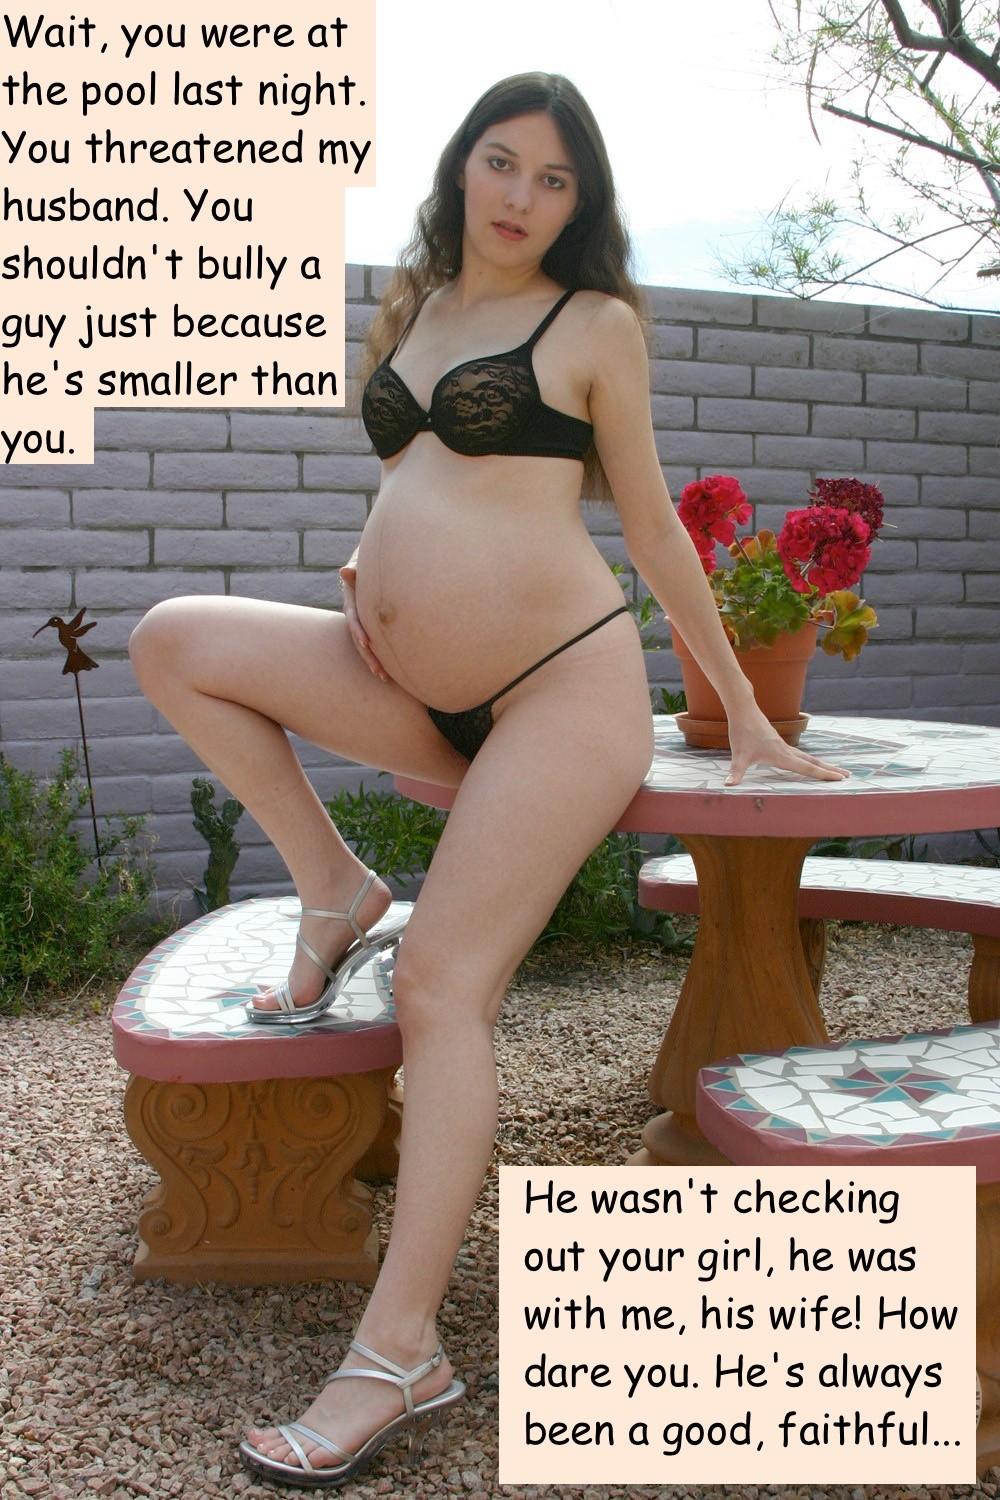 Pregnent interracial sex story pic